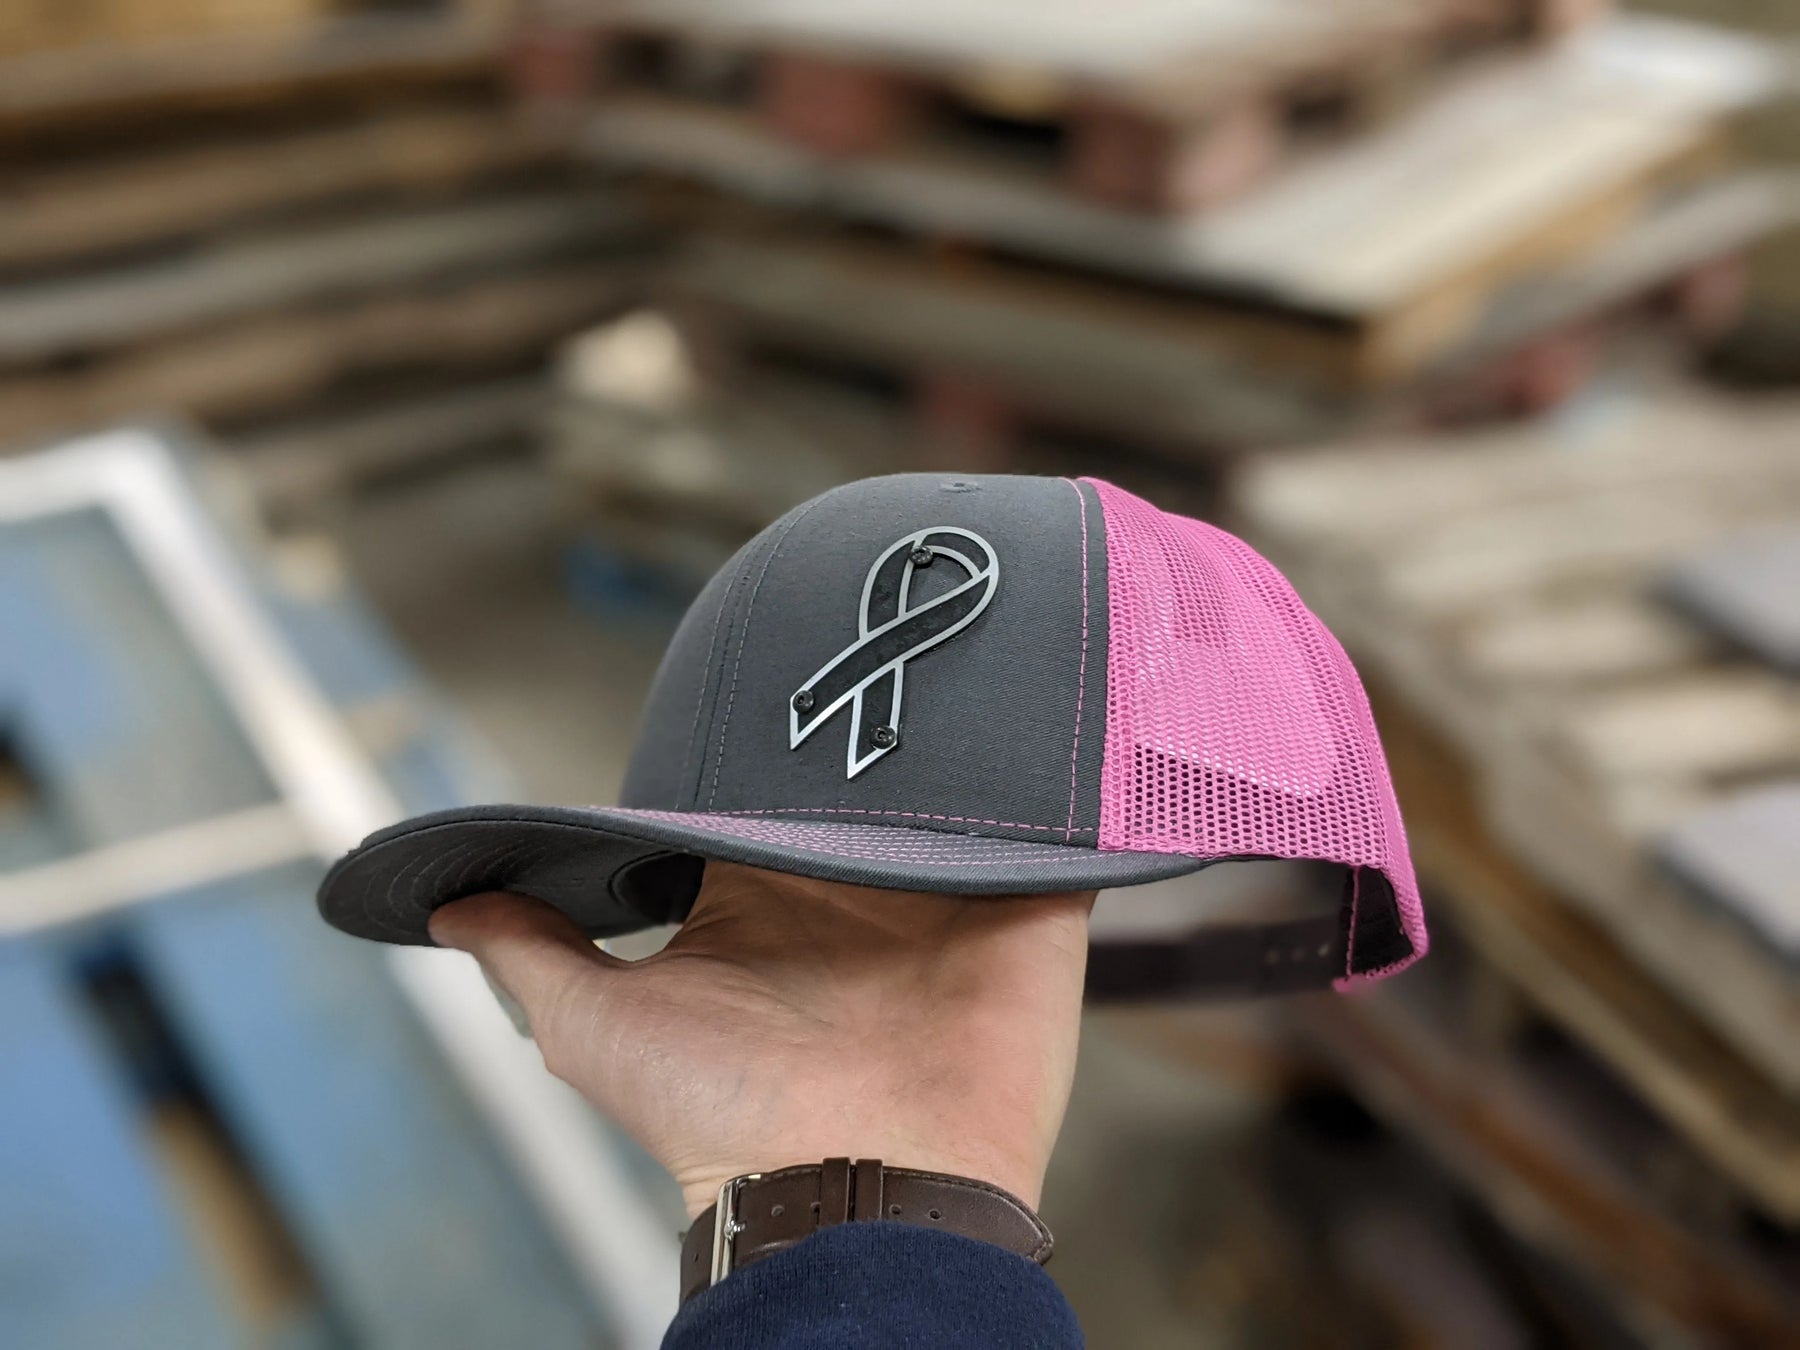 Breast Cancer Awareness Badge Hat - Black and Brushed Stainless Badge